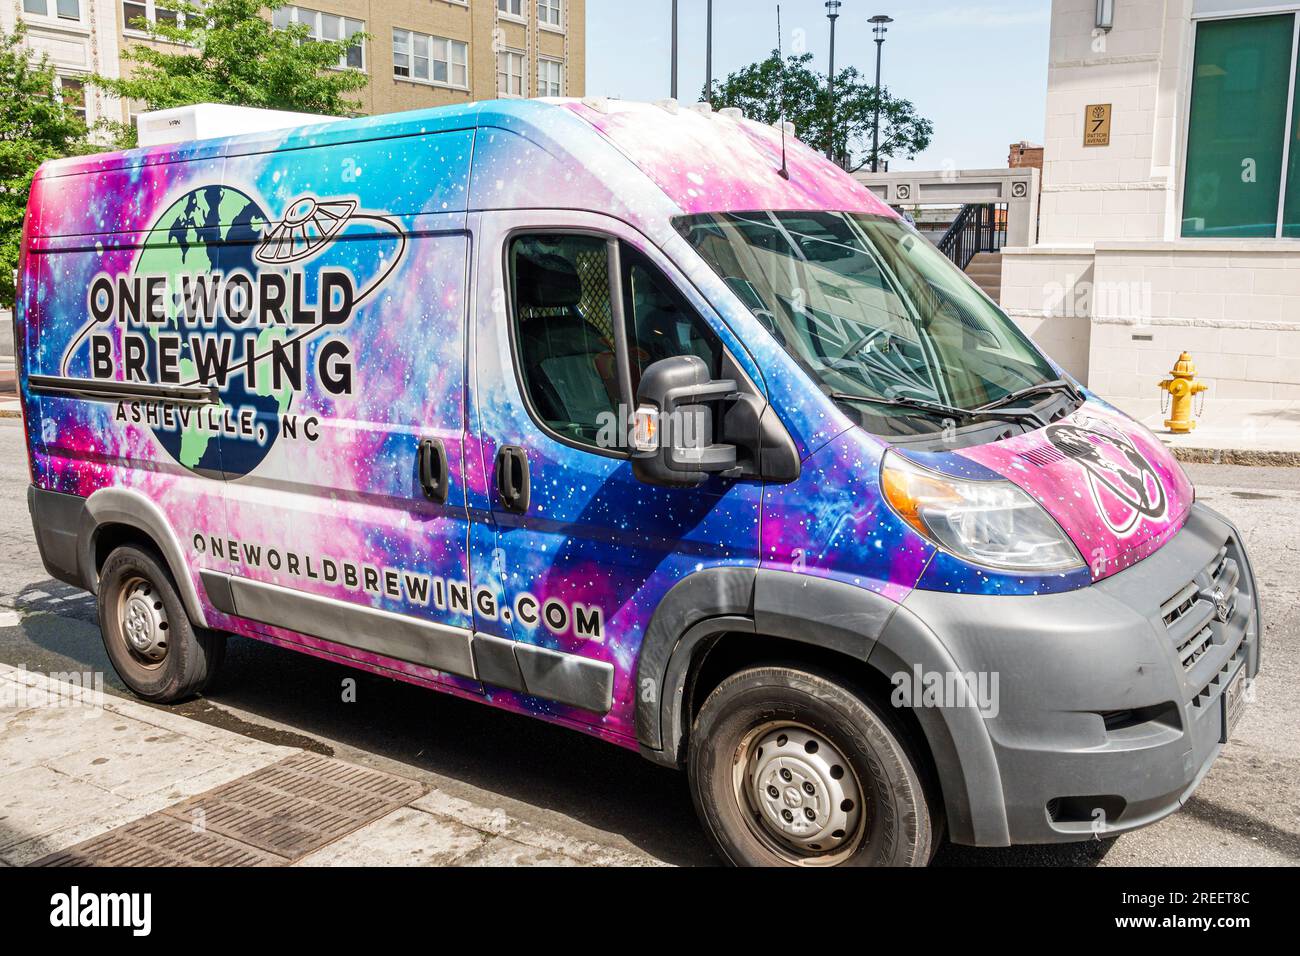 Asheville North Carolina,One World Brewing brewery beer delivery van vehicle Stock Photo